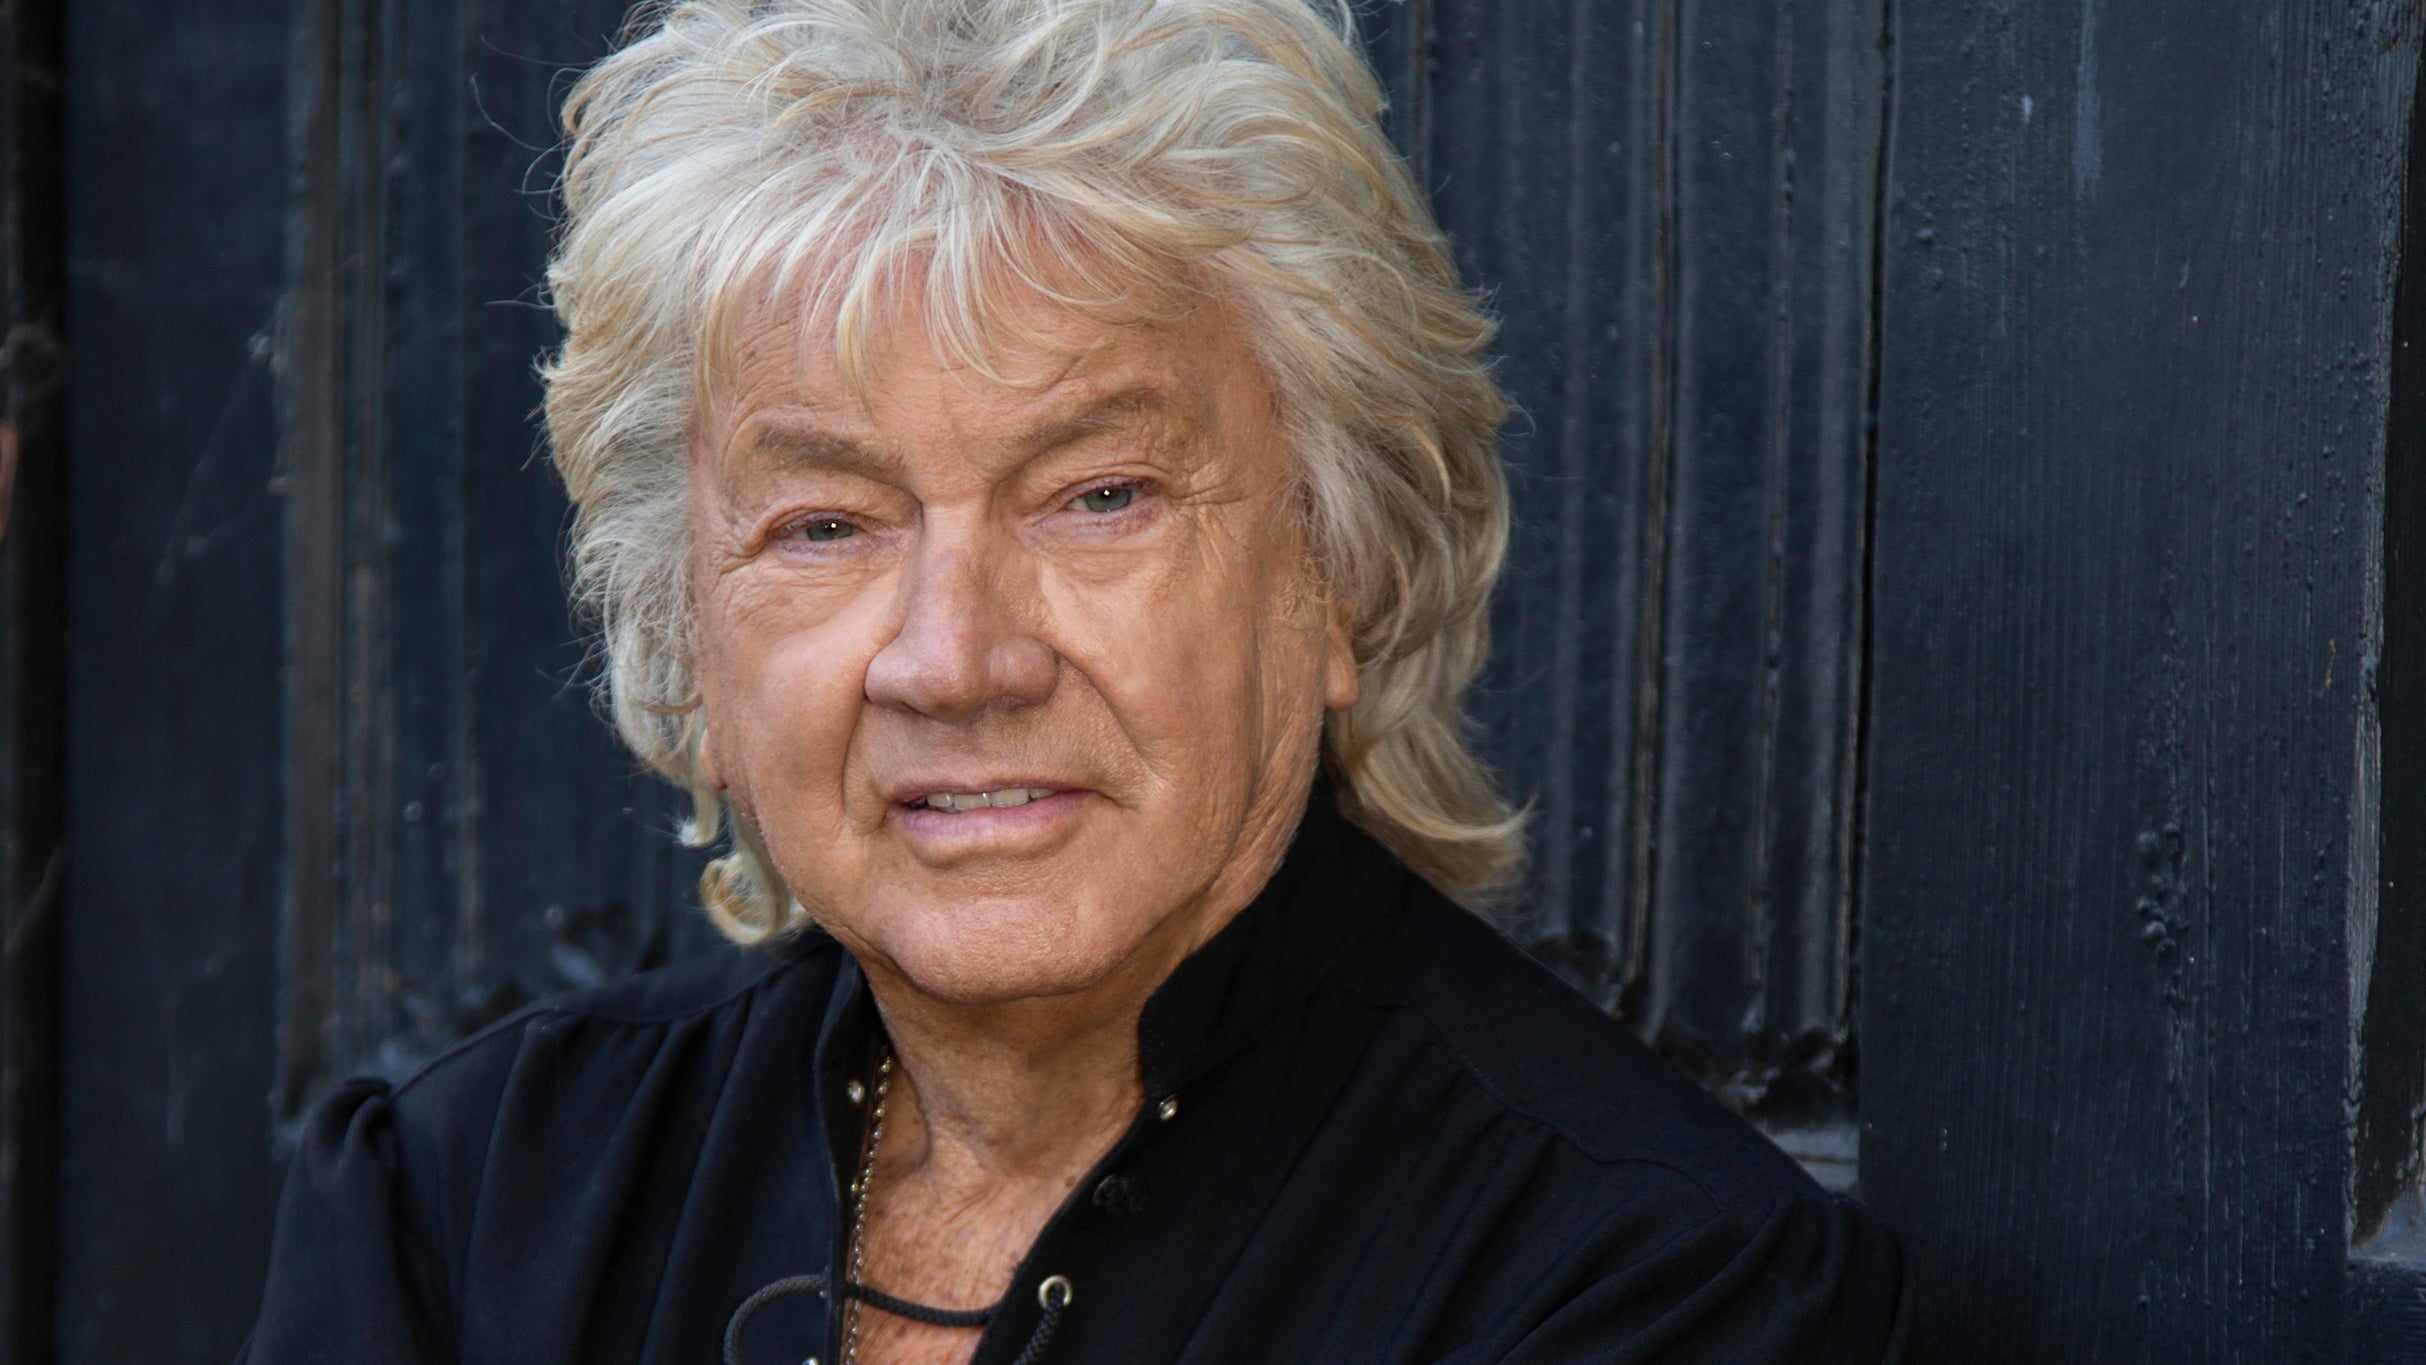 The Moody Blues' John Lodge pre-sale code for genuine tickets in Poughkeepsie